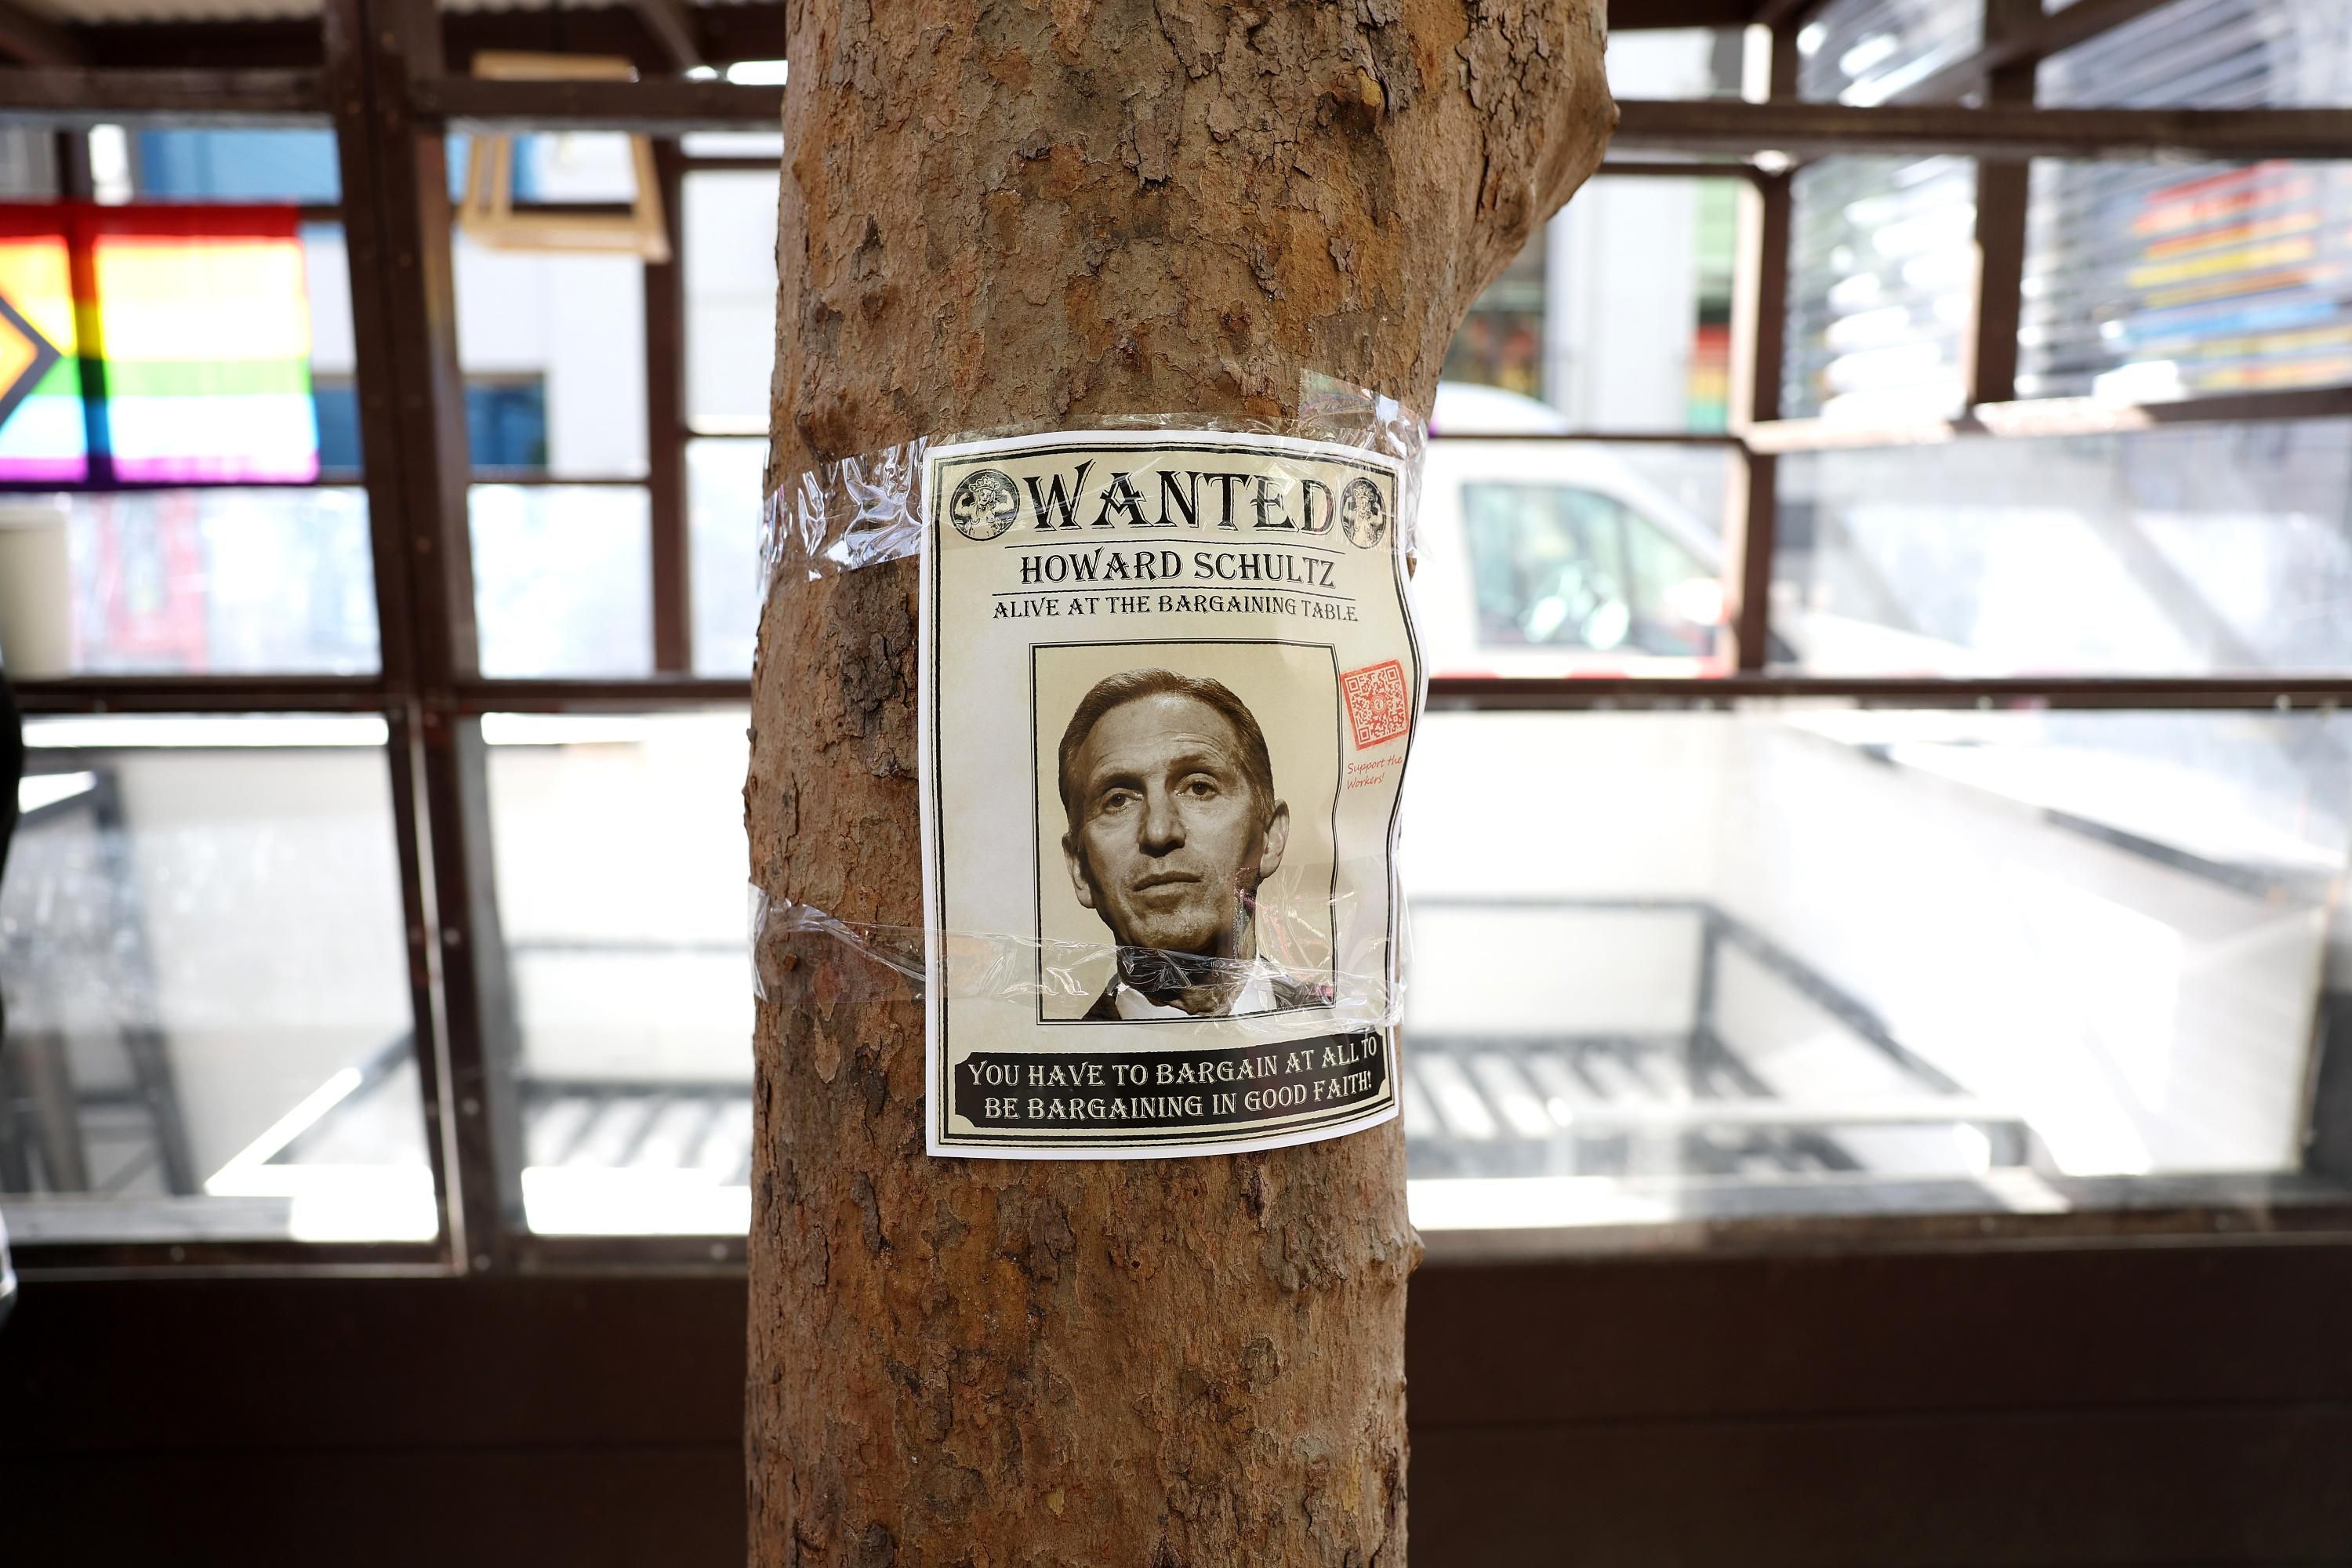 A fake "wanted" sign for Howard Schultz